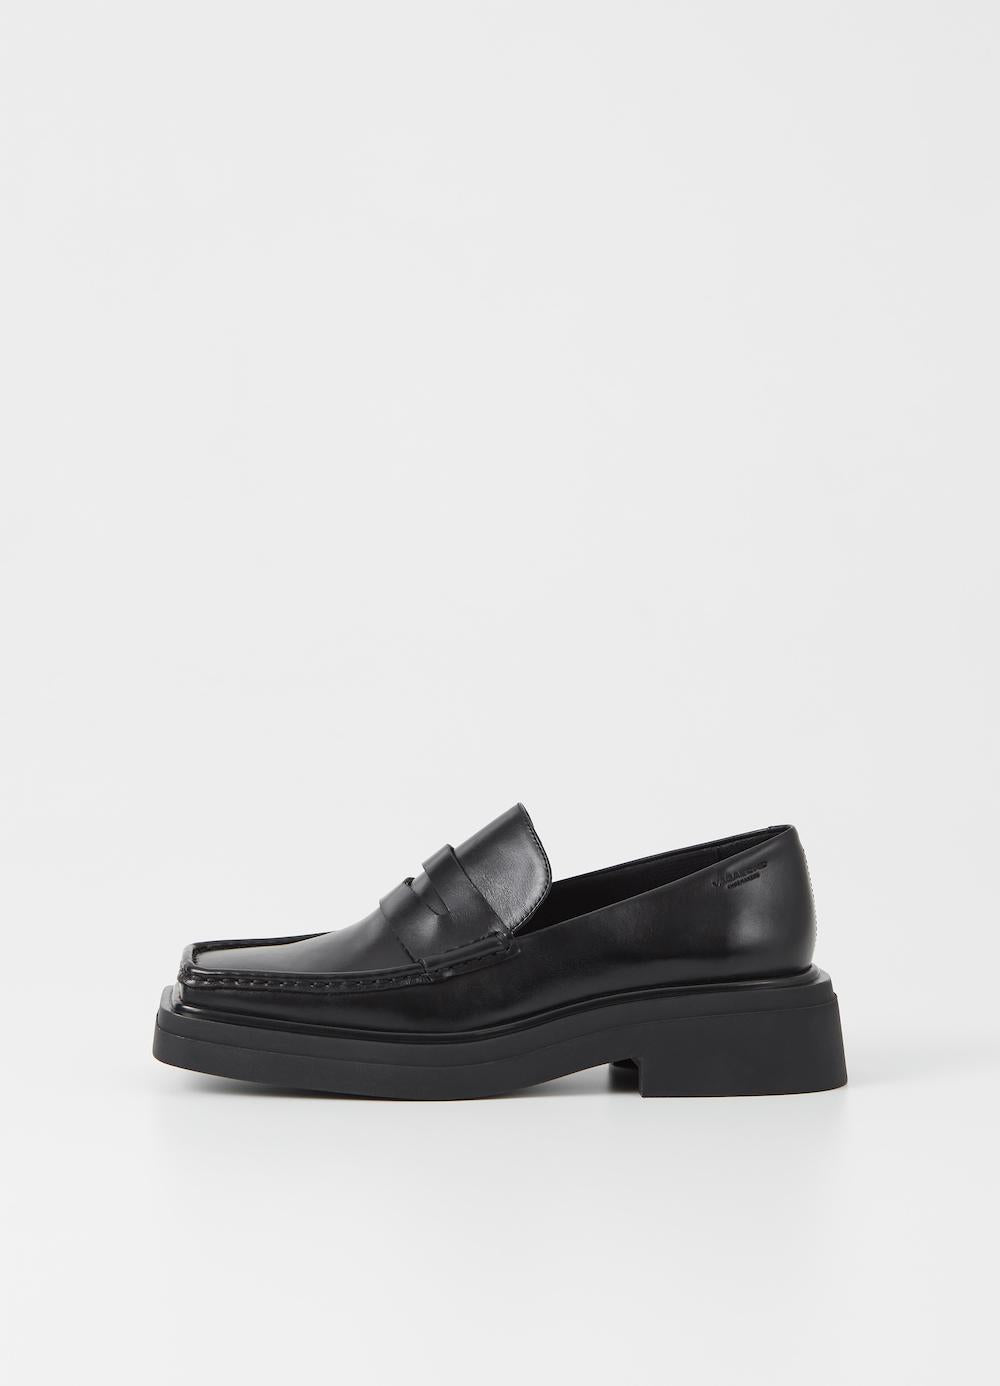 Vagabond Eyra polished black leather square toe penny loafers | pipe ...